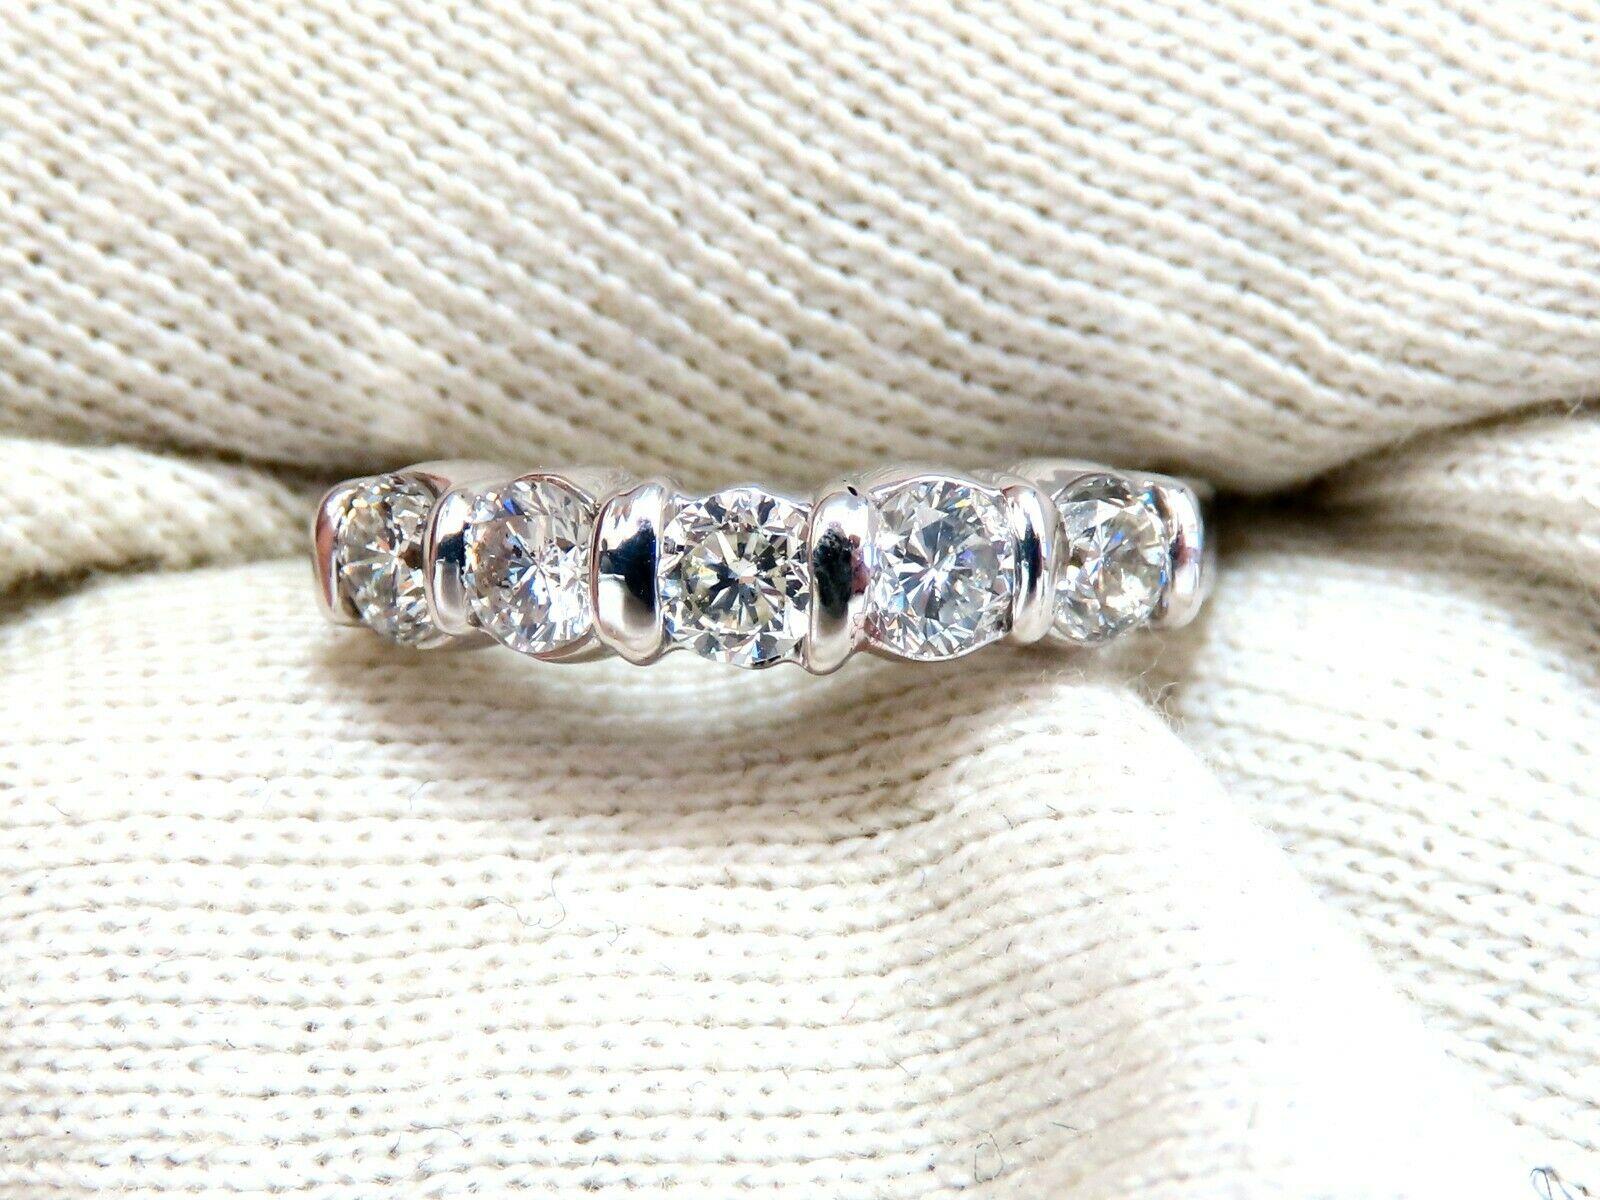 Super Durable Channel Band

1.02ct Natural Diamonds

 Full cut, Rounds 

I color, Si-2 clarity

Platinum
4.6 Grams

4.2mm wide 

3.5mm depth

current size: 5.75

We may resize (please inquire).

$3000 appraisal certificate will accompany